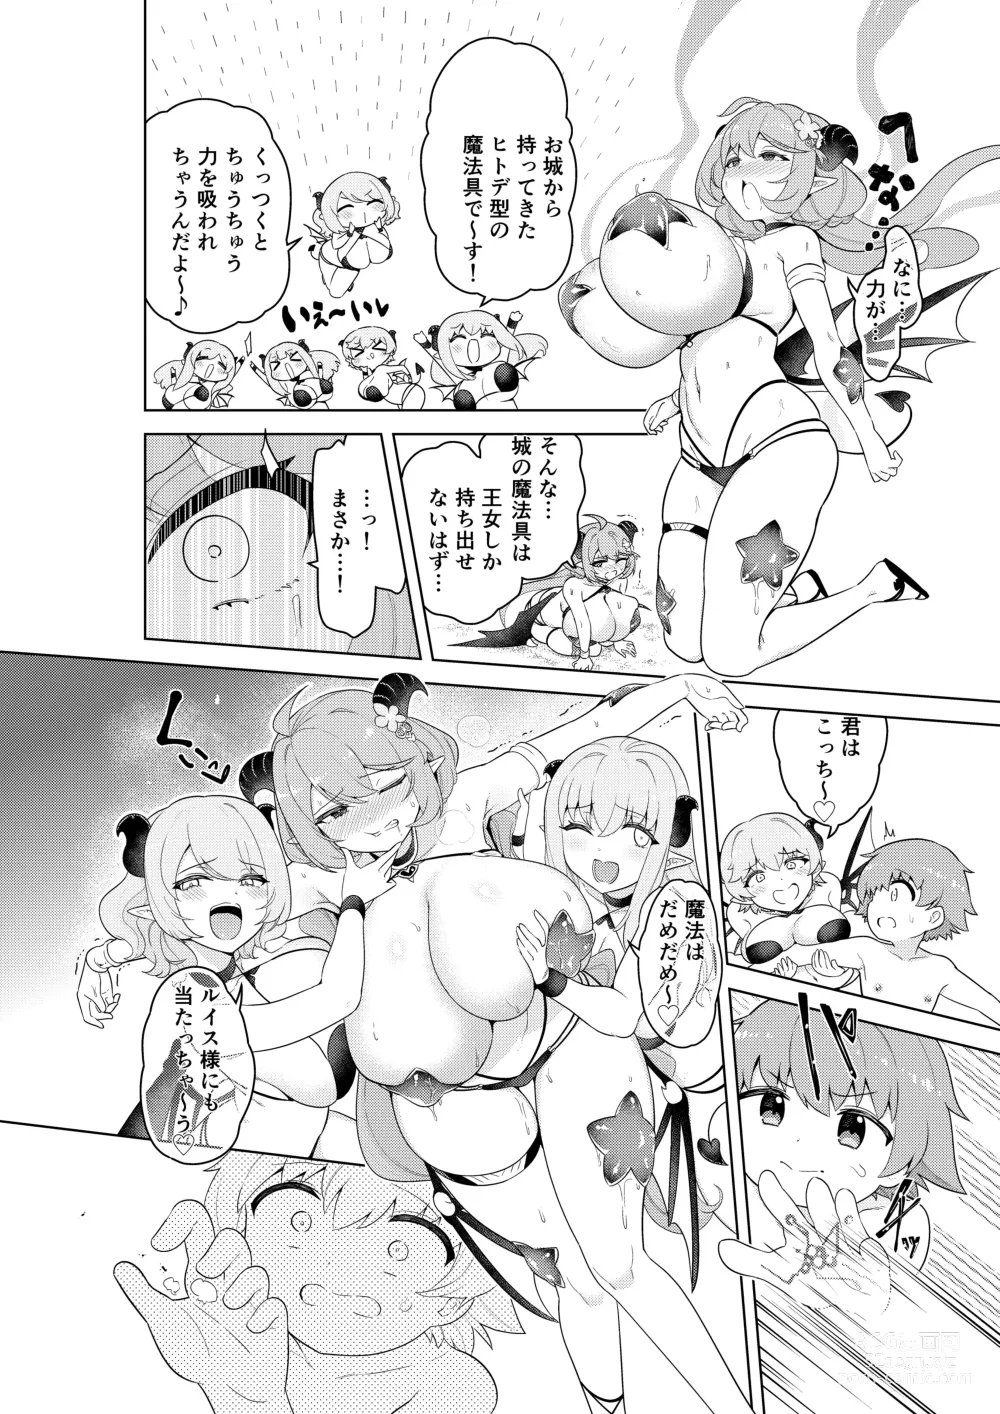 Page 57 of doujinshi Succubus in Wonderland: Comicalize!